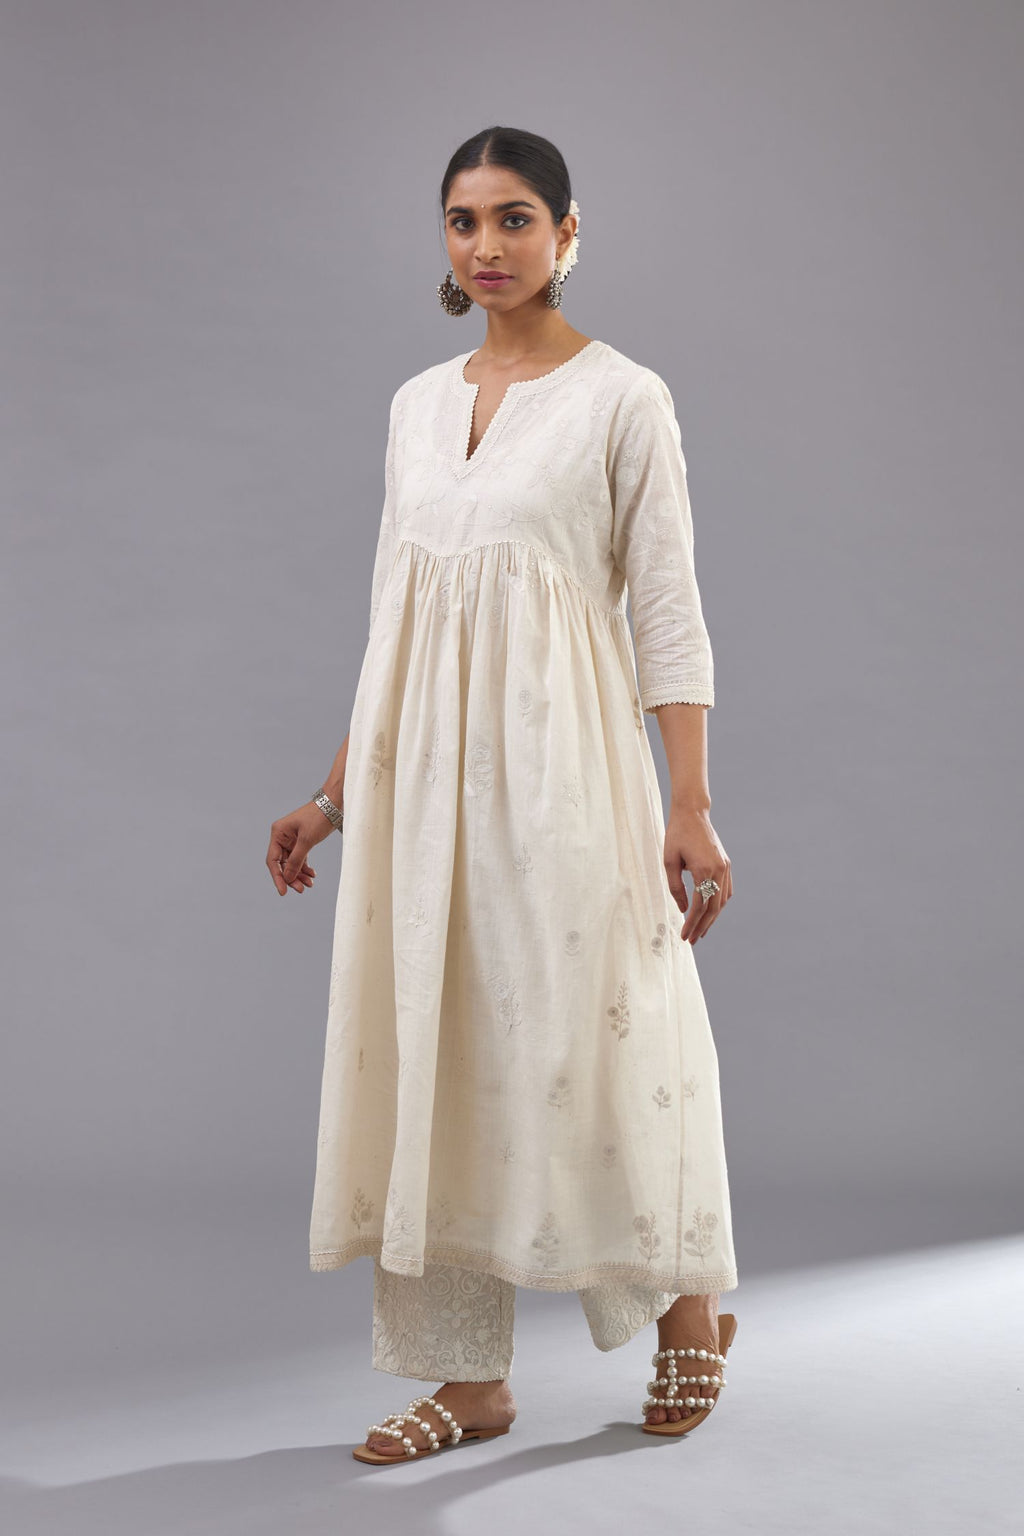 Handspun handwoven cotton  kurta set with wavy empire waistline and gathers, highlighted with all-over tonal colored thread embroidery and ric-rac detail.